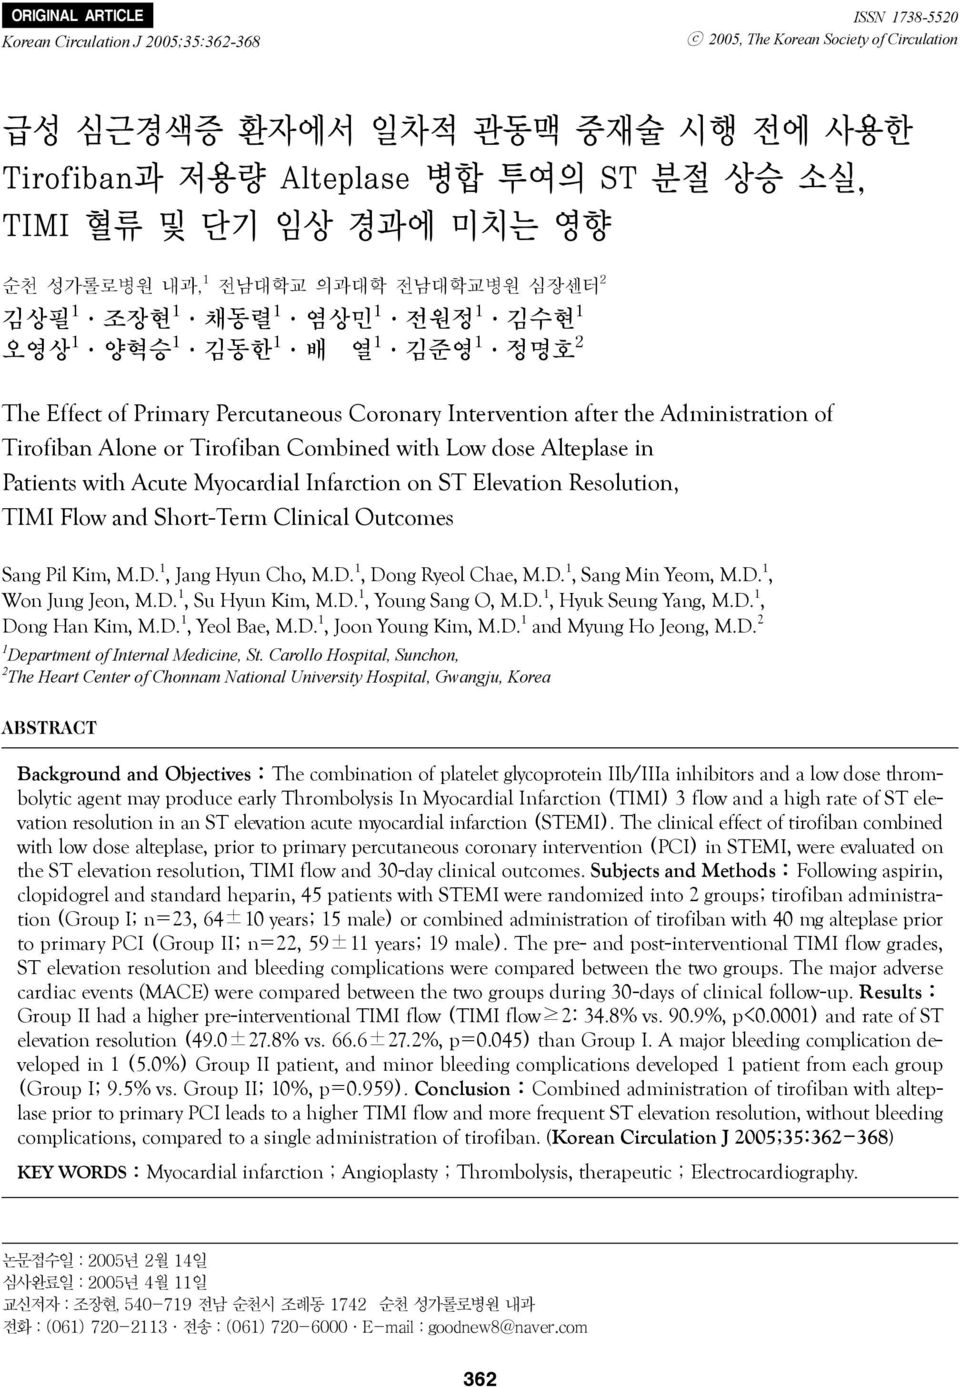 Intervention after the Administration of Tirofiban Alone or Tirofiban Combined with Low dose Alteplase in Patients with Acute Myocardial Infarction on ST Elevation Resolution, TIMI Flow and